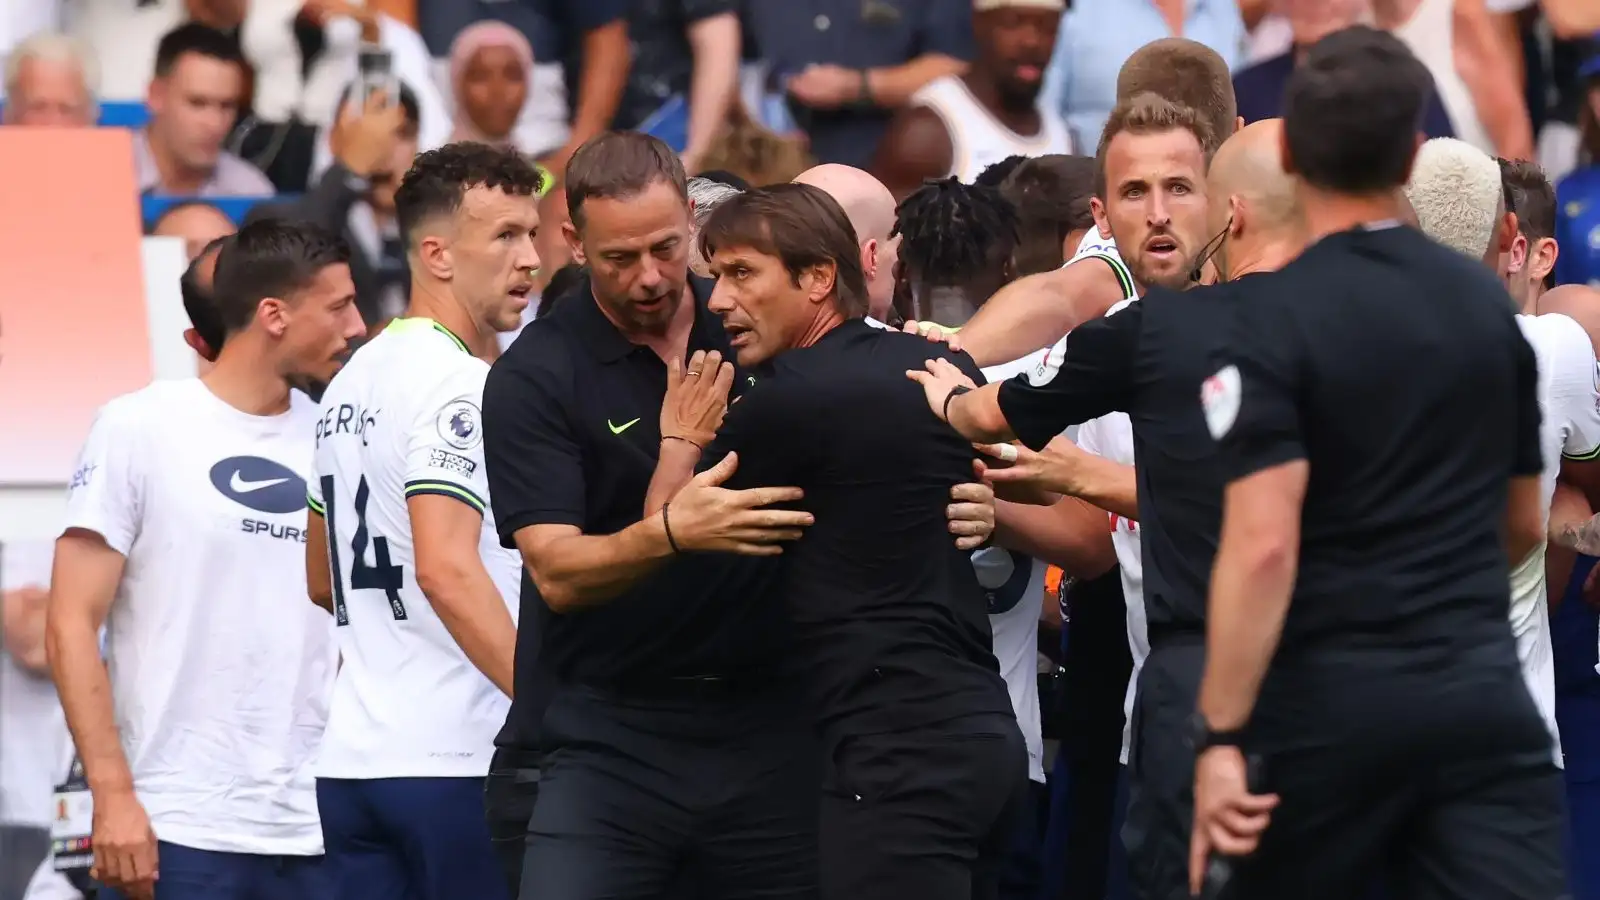 Antonio Conte gets angry and so did his players